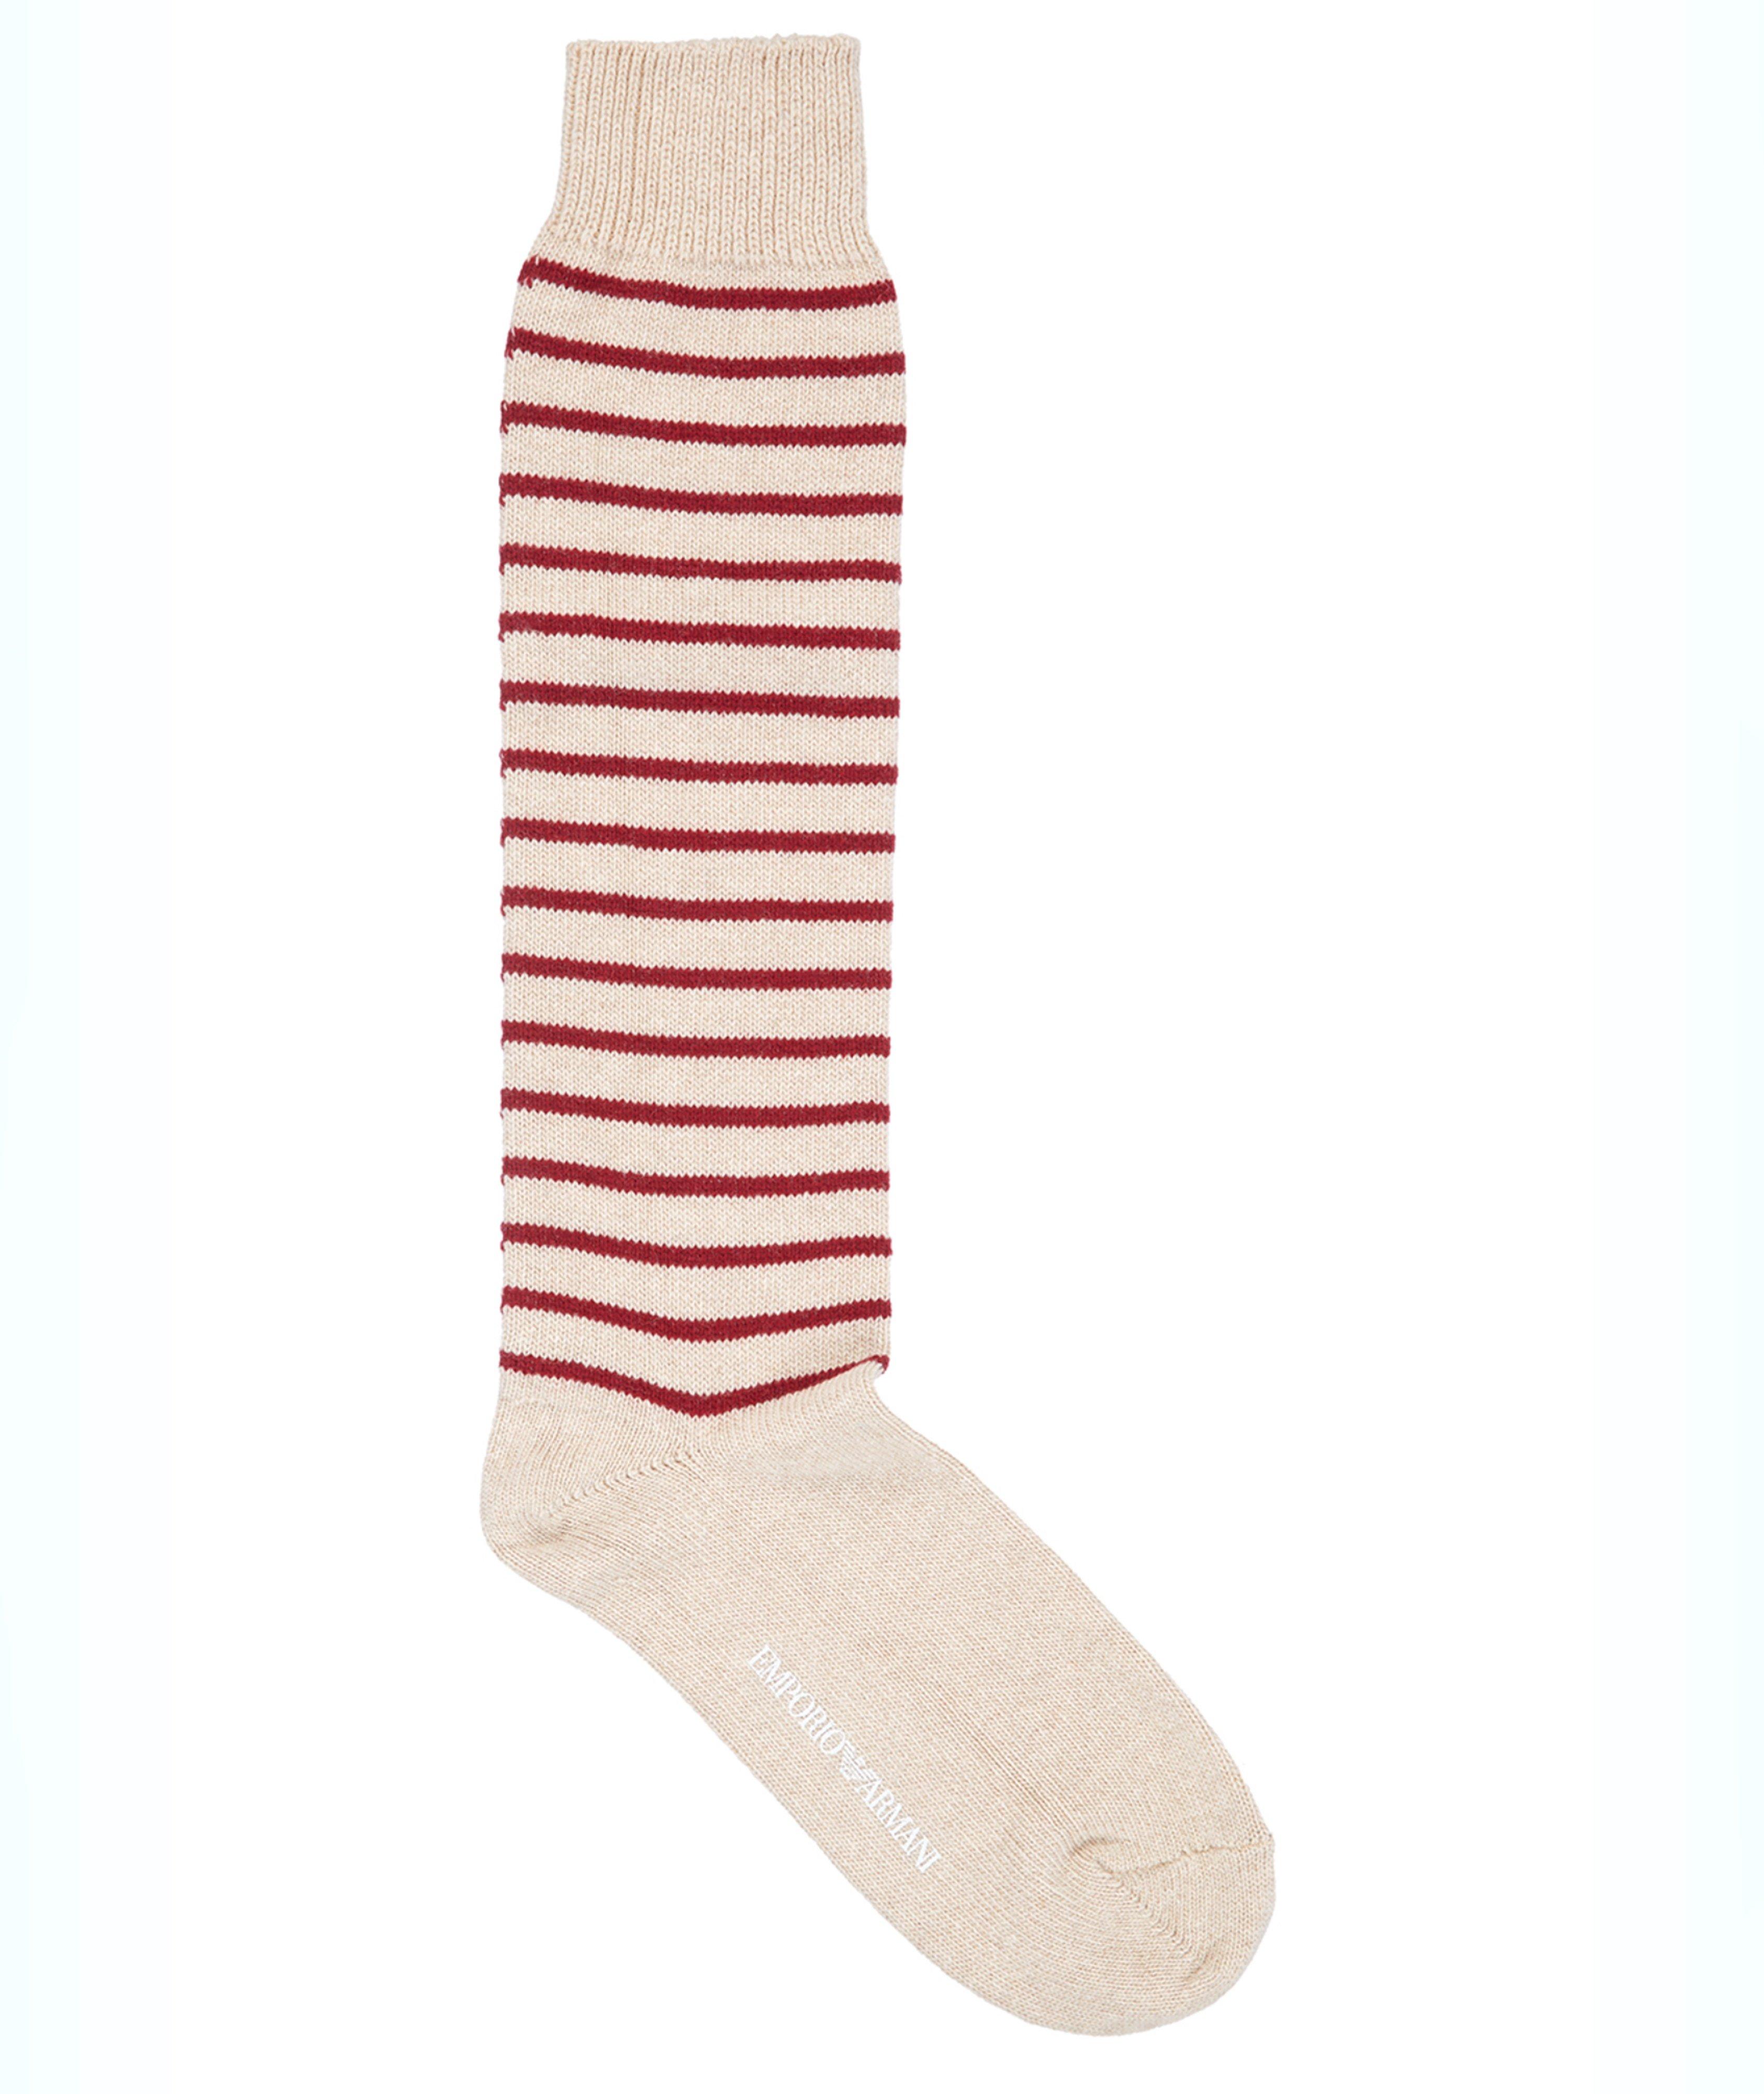 EArctic Sustainable Collection Wool-Blend Stripe Socks image 0